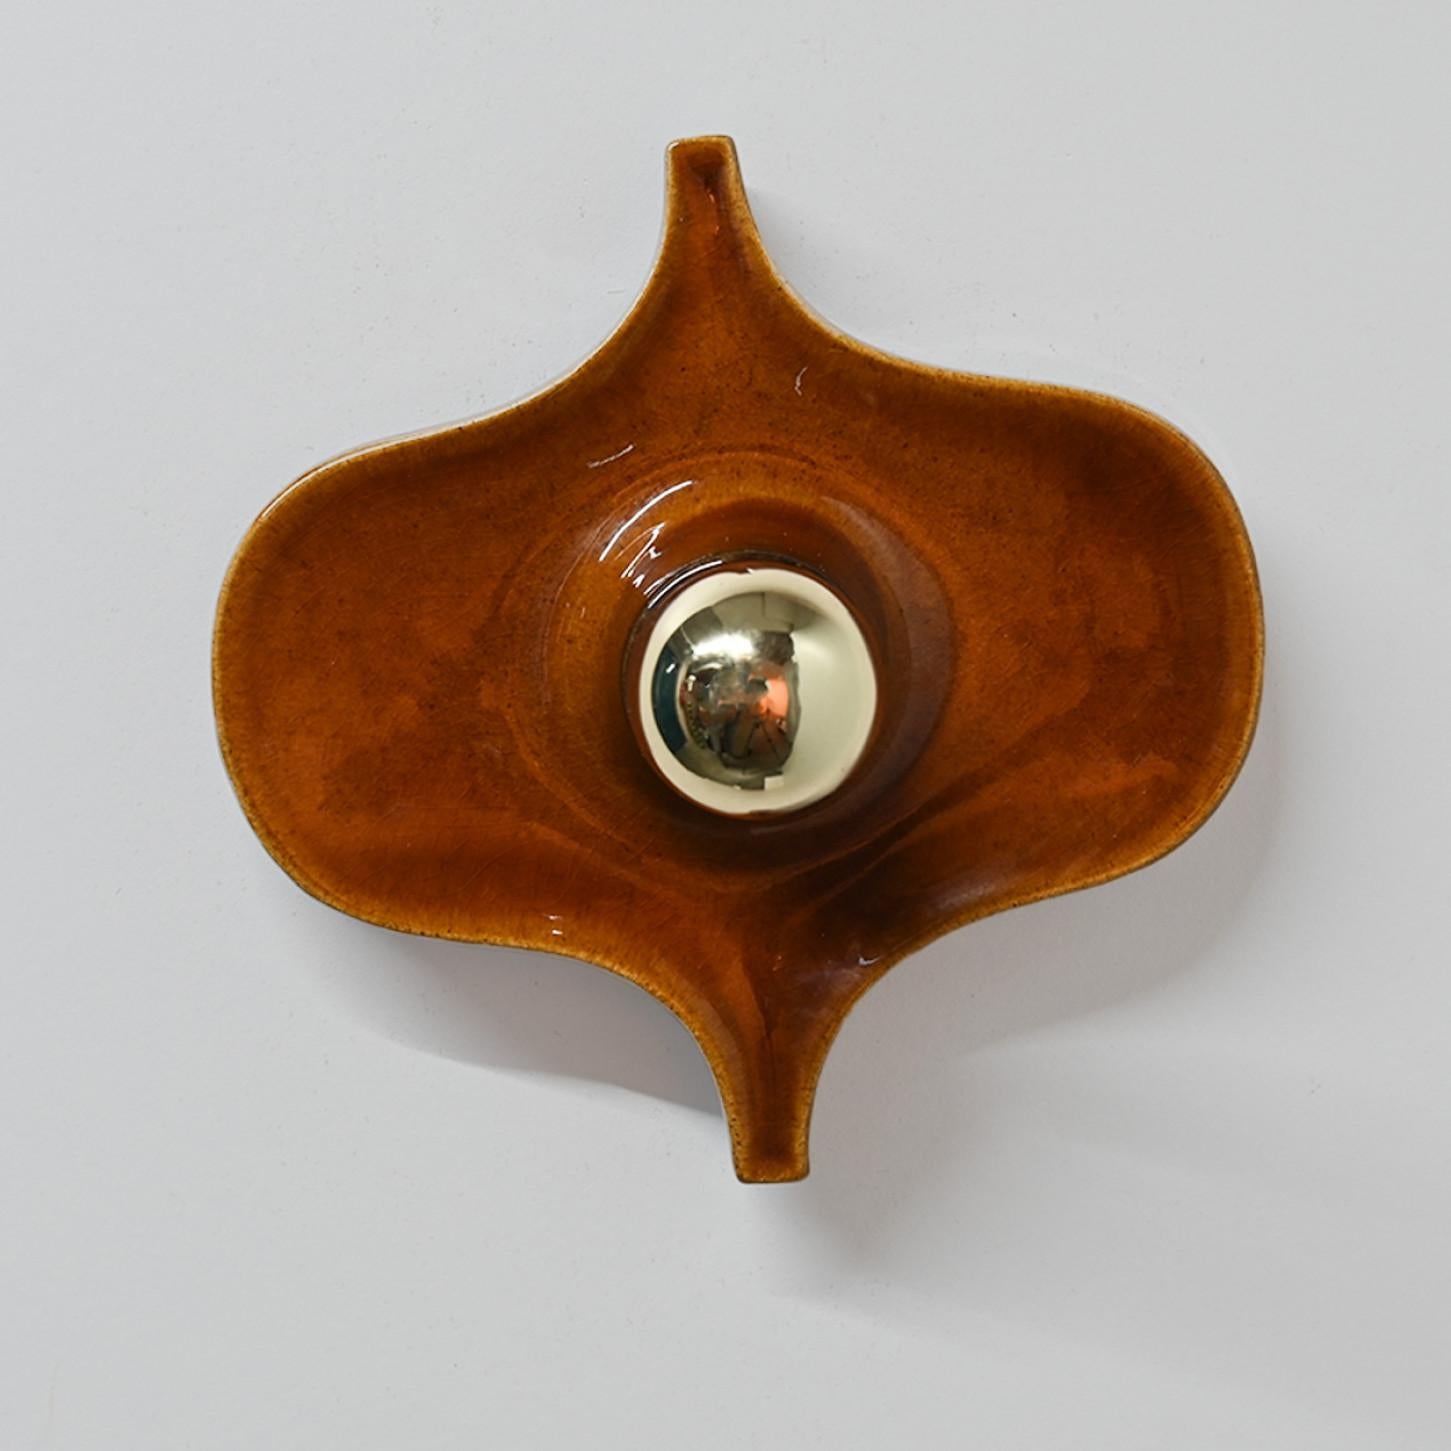 Brown ceramic wall lights in Fat Lava style. Manufactured by Hustadt Leuchten Keramik, Germany in the 1970s.

Measurements:
Width: 8.26 in (21 cm)
Heigth: 7.87 in (20 cm)
Depth: 4.72 in (12 cm)

Please note the price is for one piece. We have a